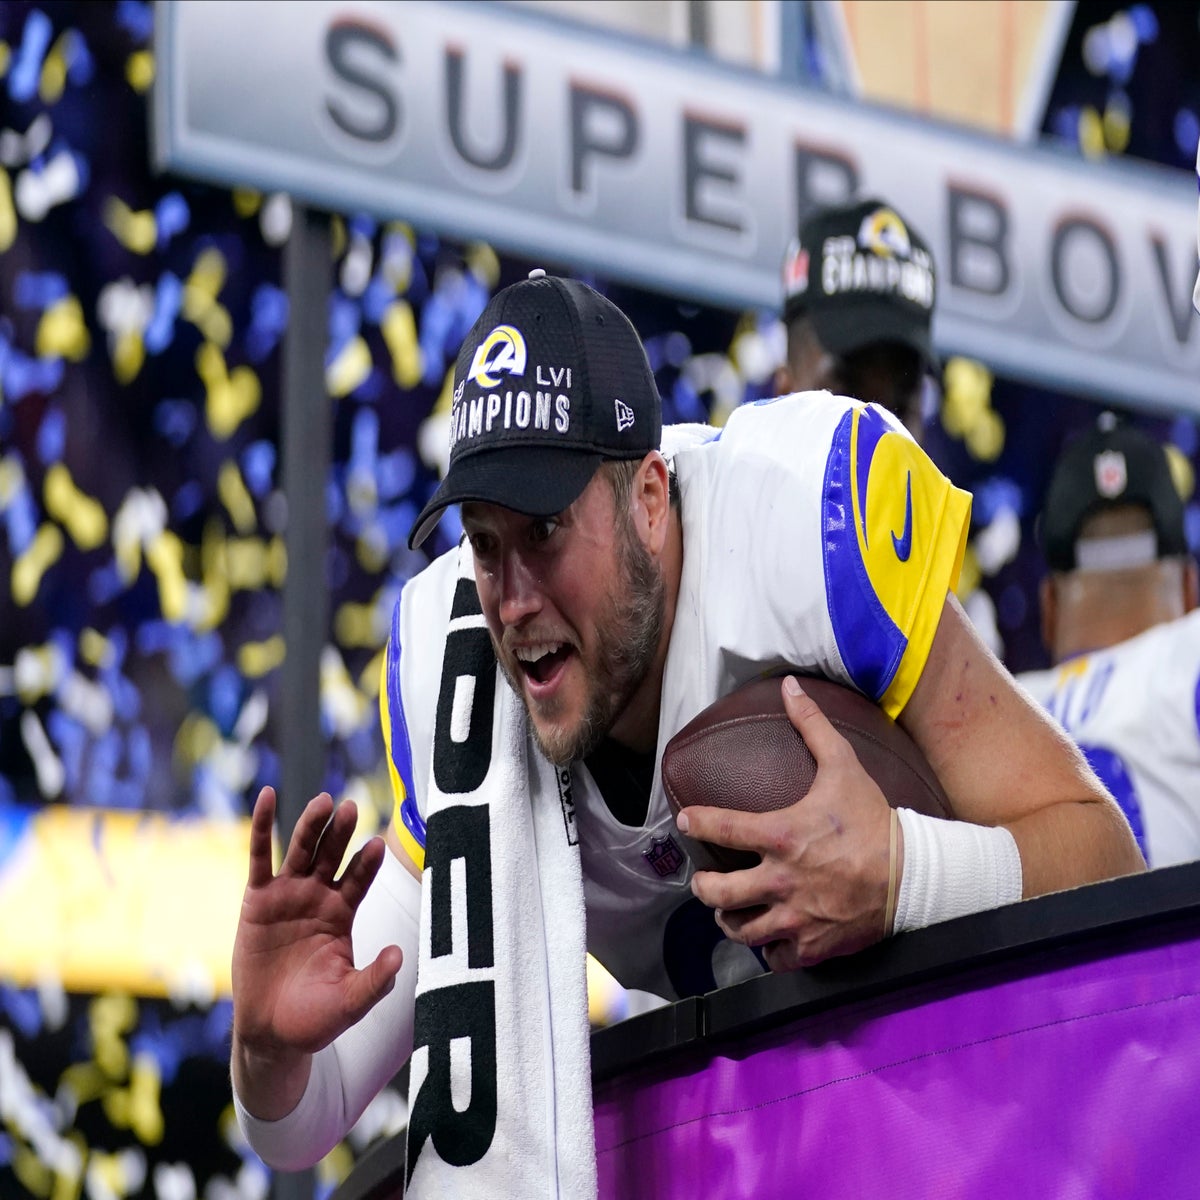 Super Bowl has 101.1 million TV viewers, up from 2021